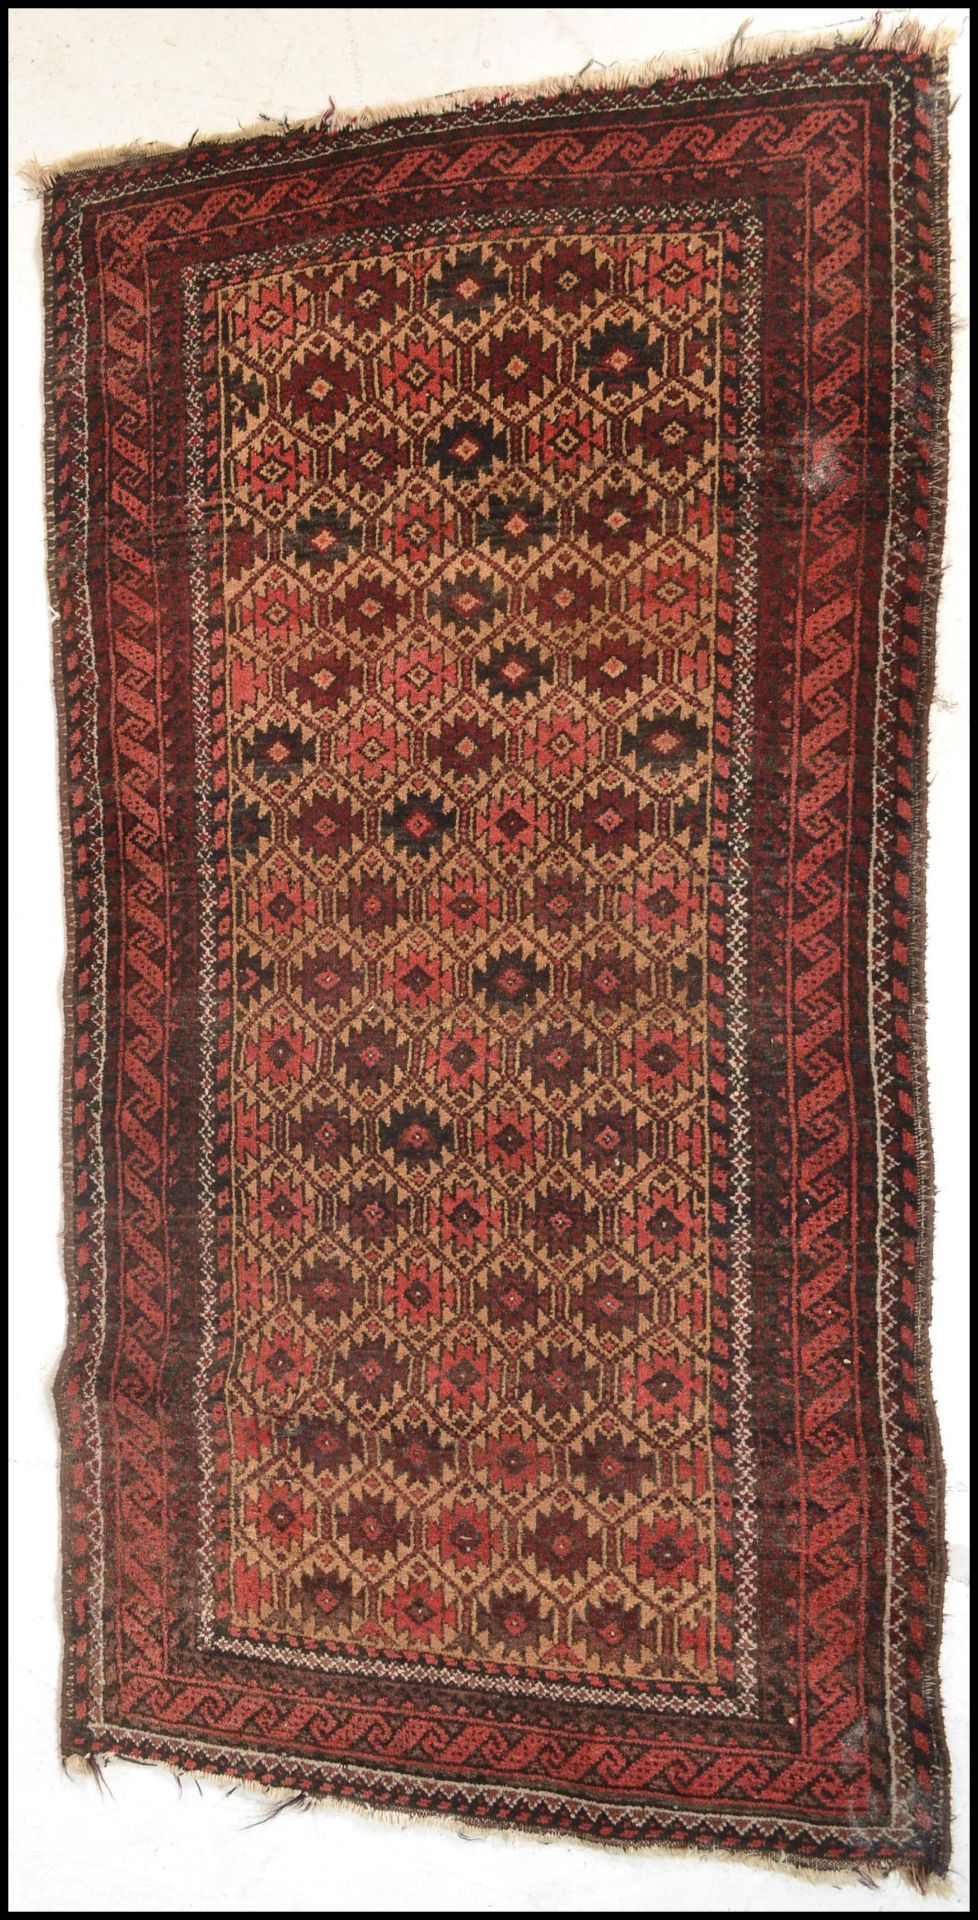 A 20th Century woolen hand knotted carpet floor rug on red ground, central geometric panel